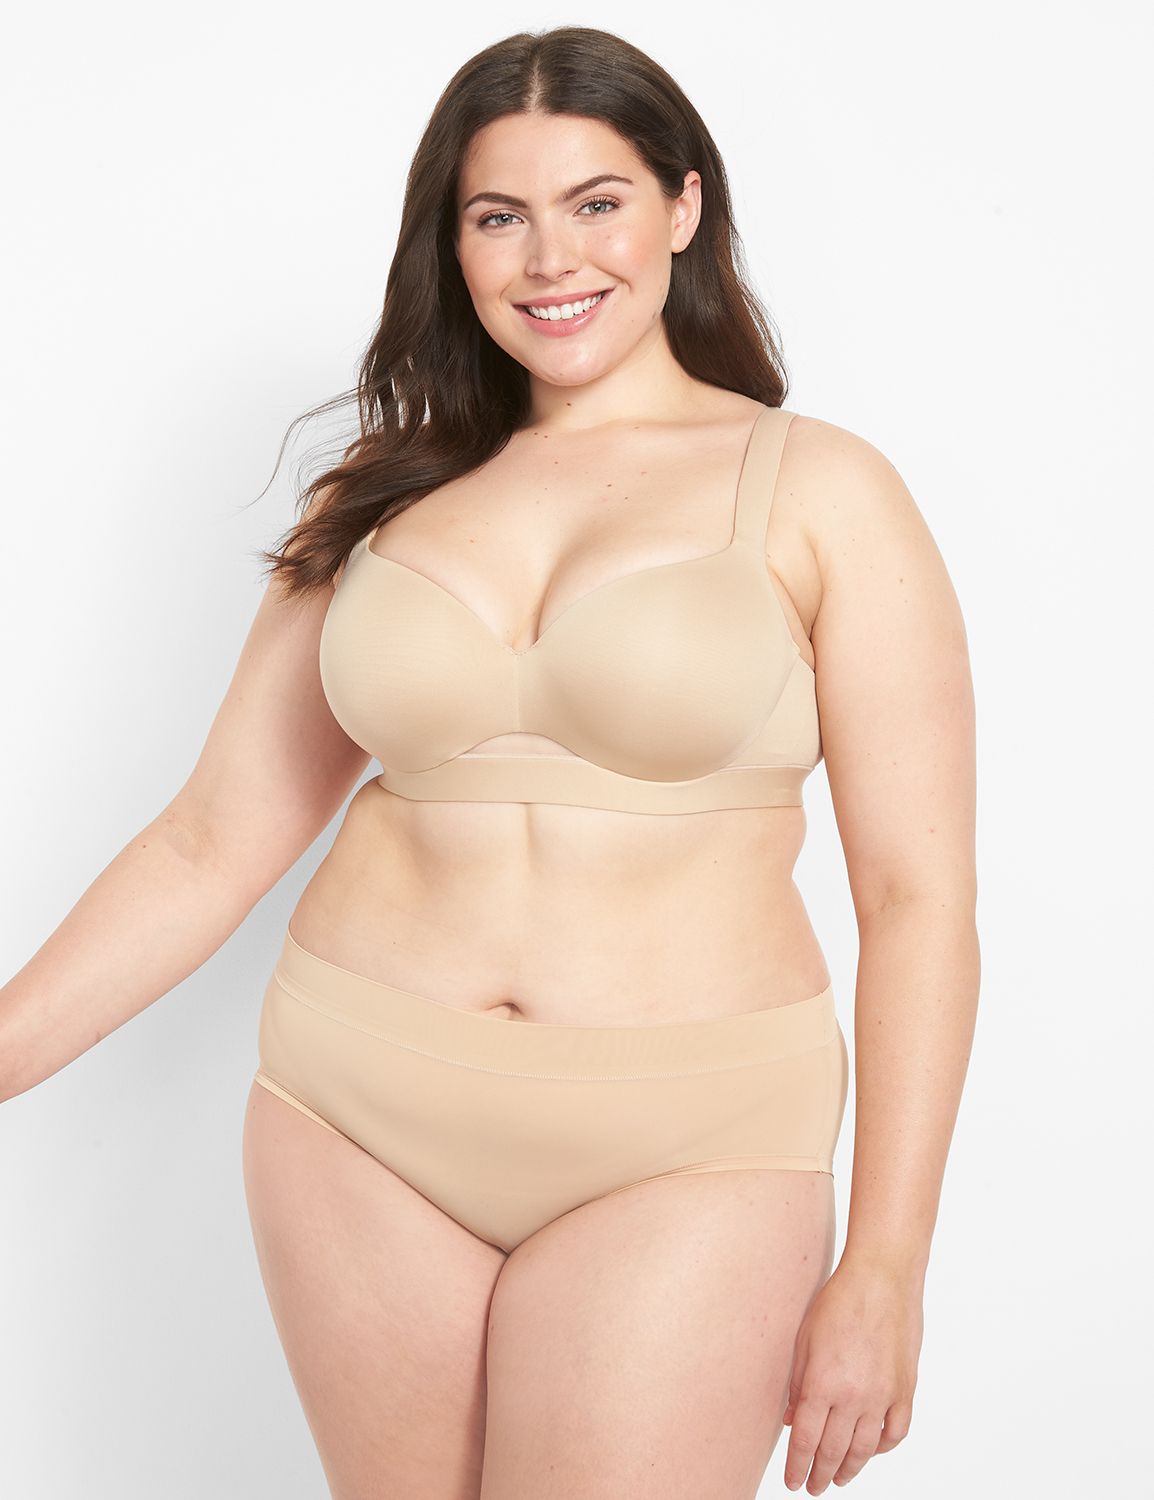 Lane Bryant - Bliss in bra form? Yes, we did. Check out